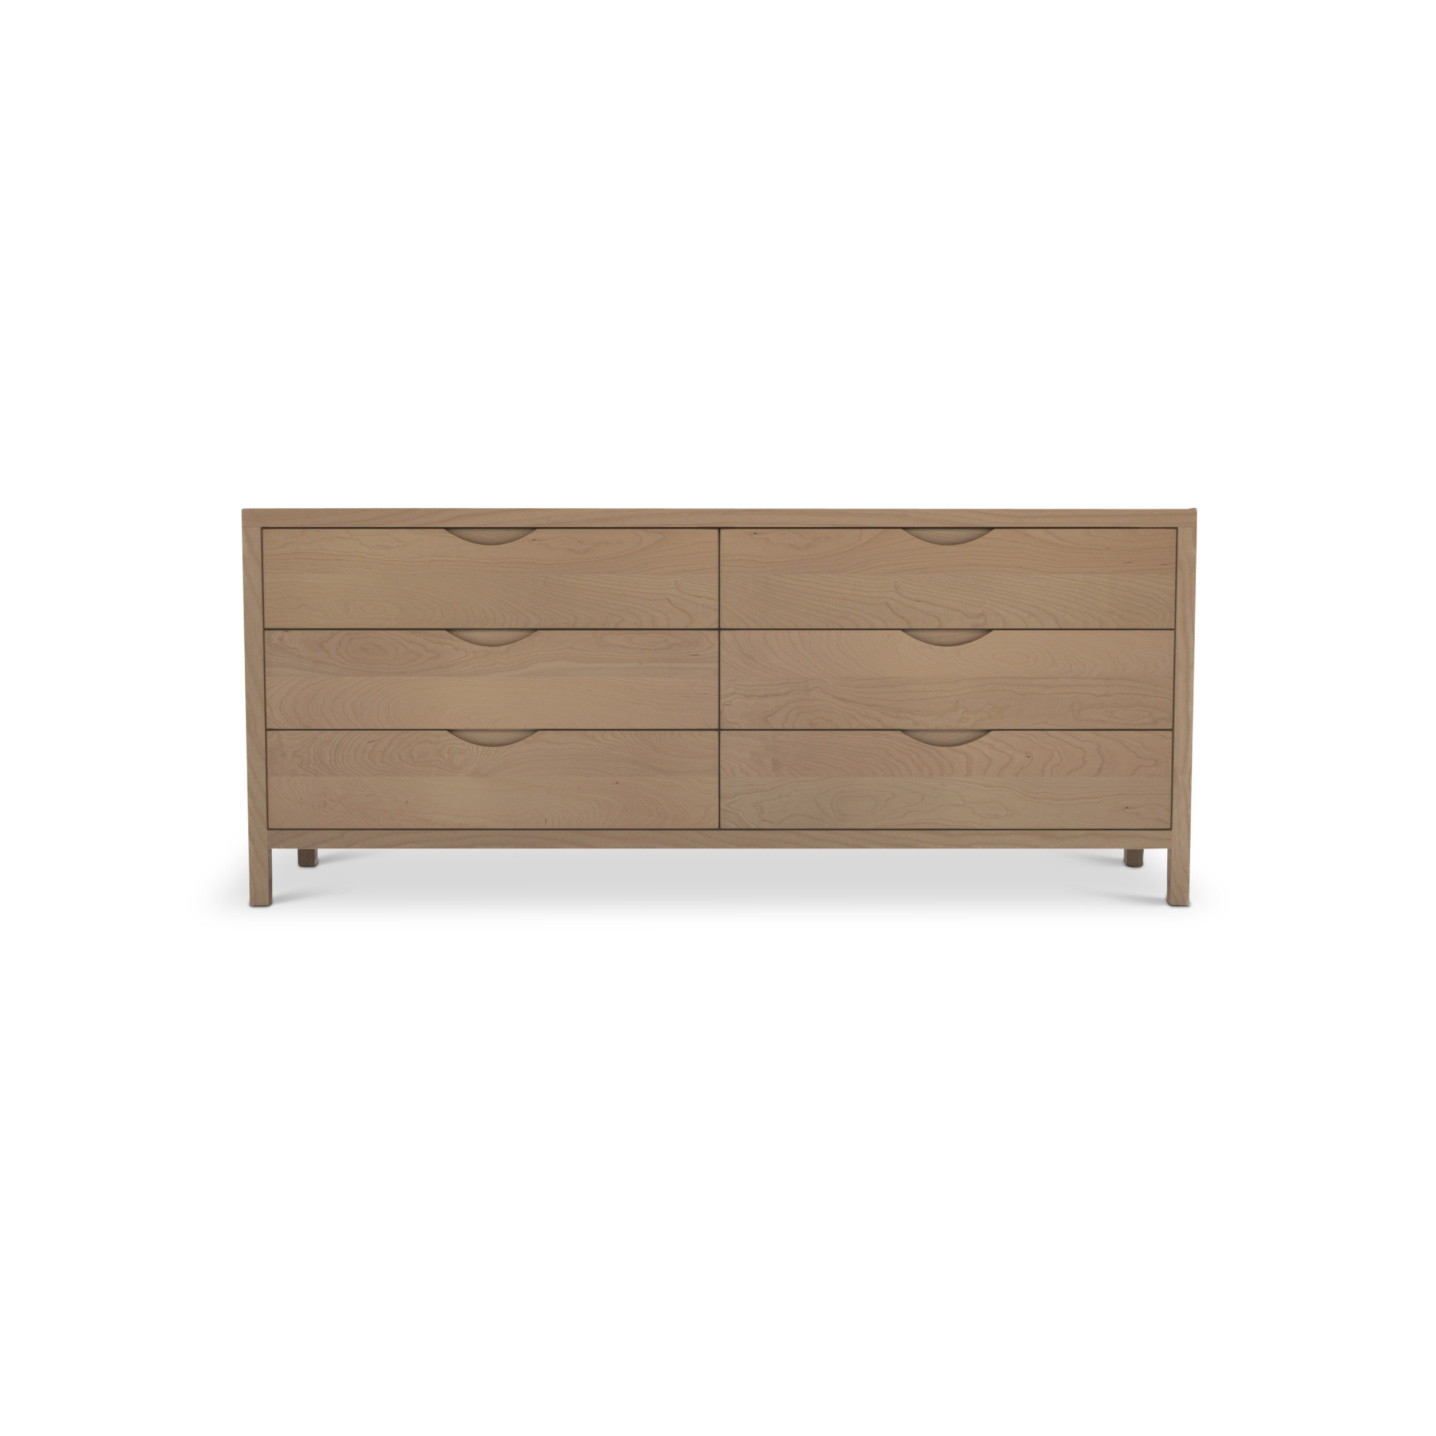 72" Solid cherry Danish dresser with integrated handles